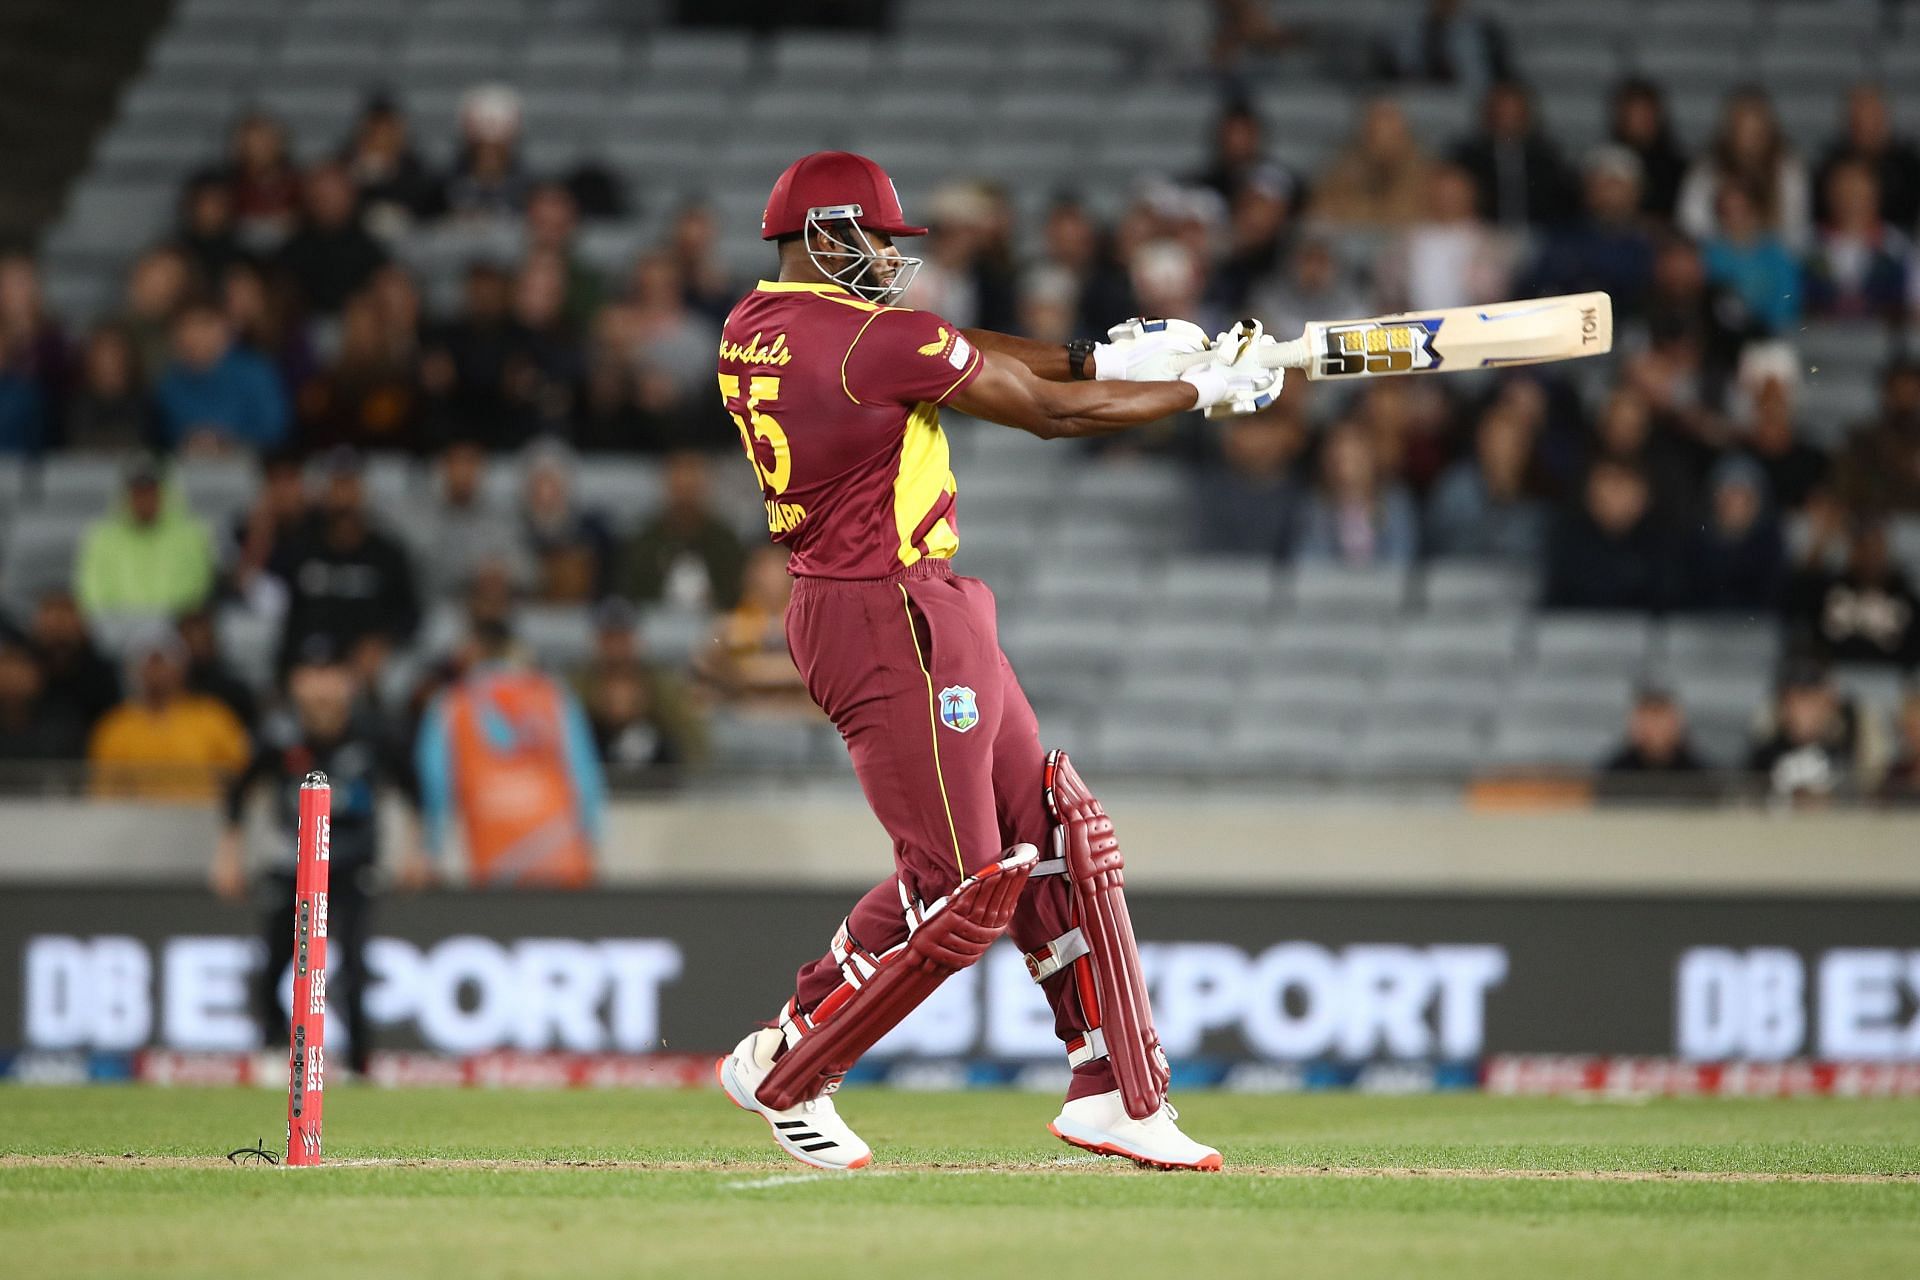 Kieron Pollard was the standout batter for the West Indies